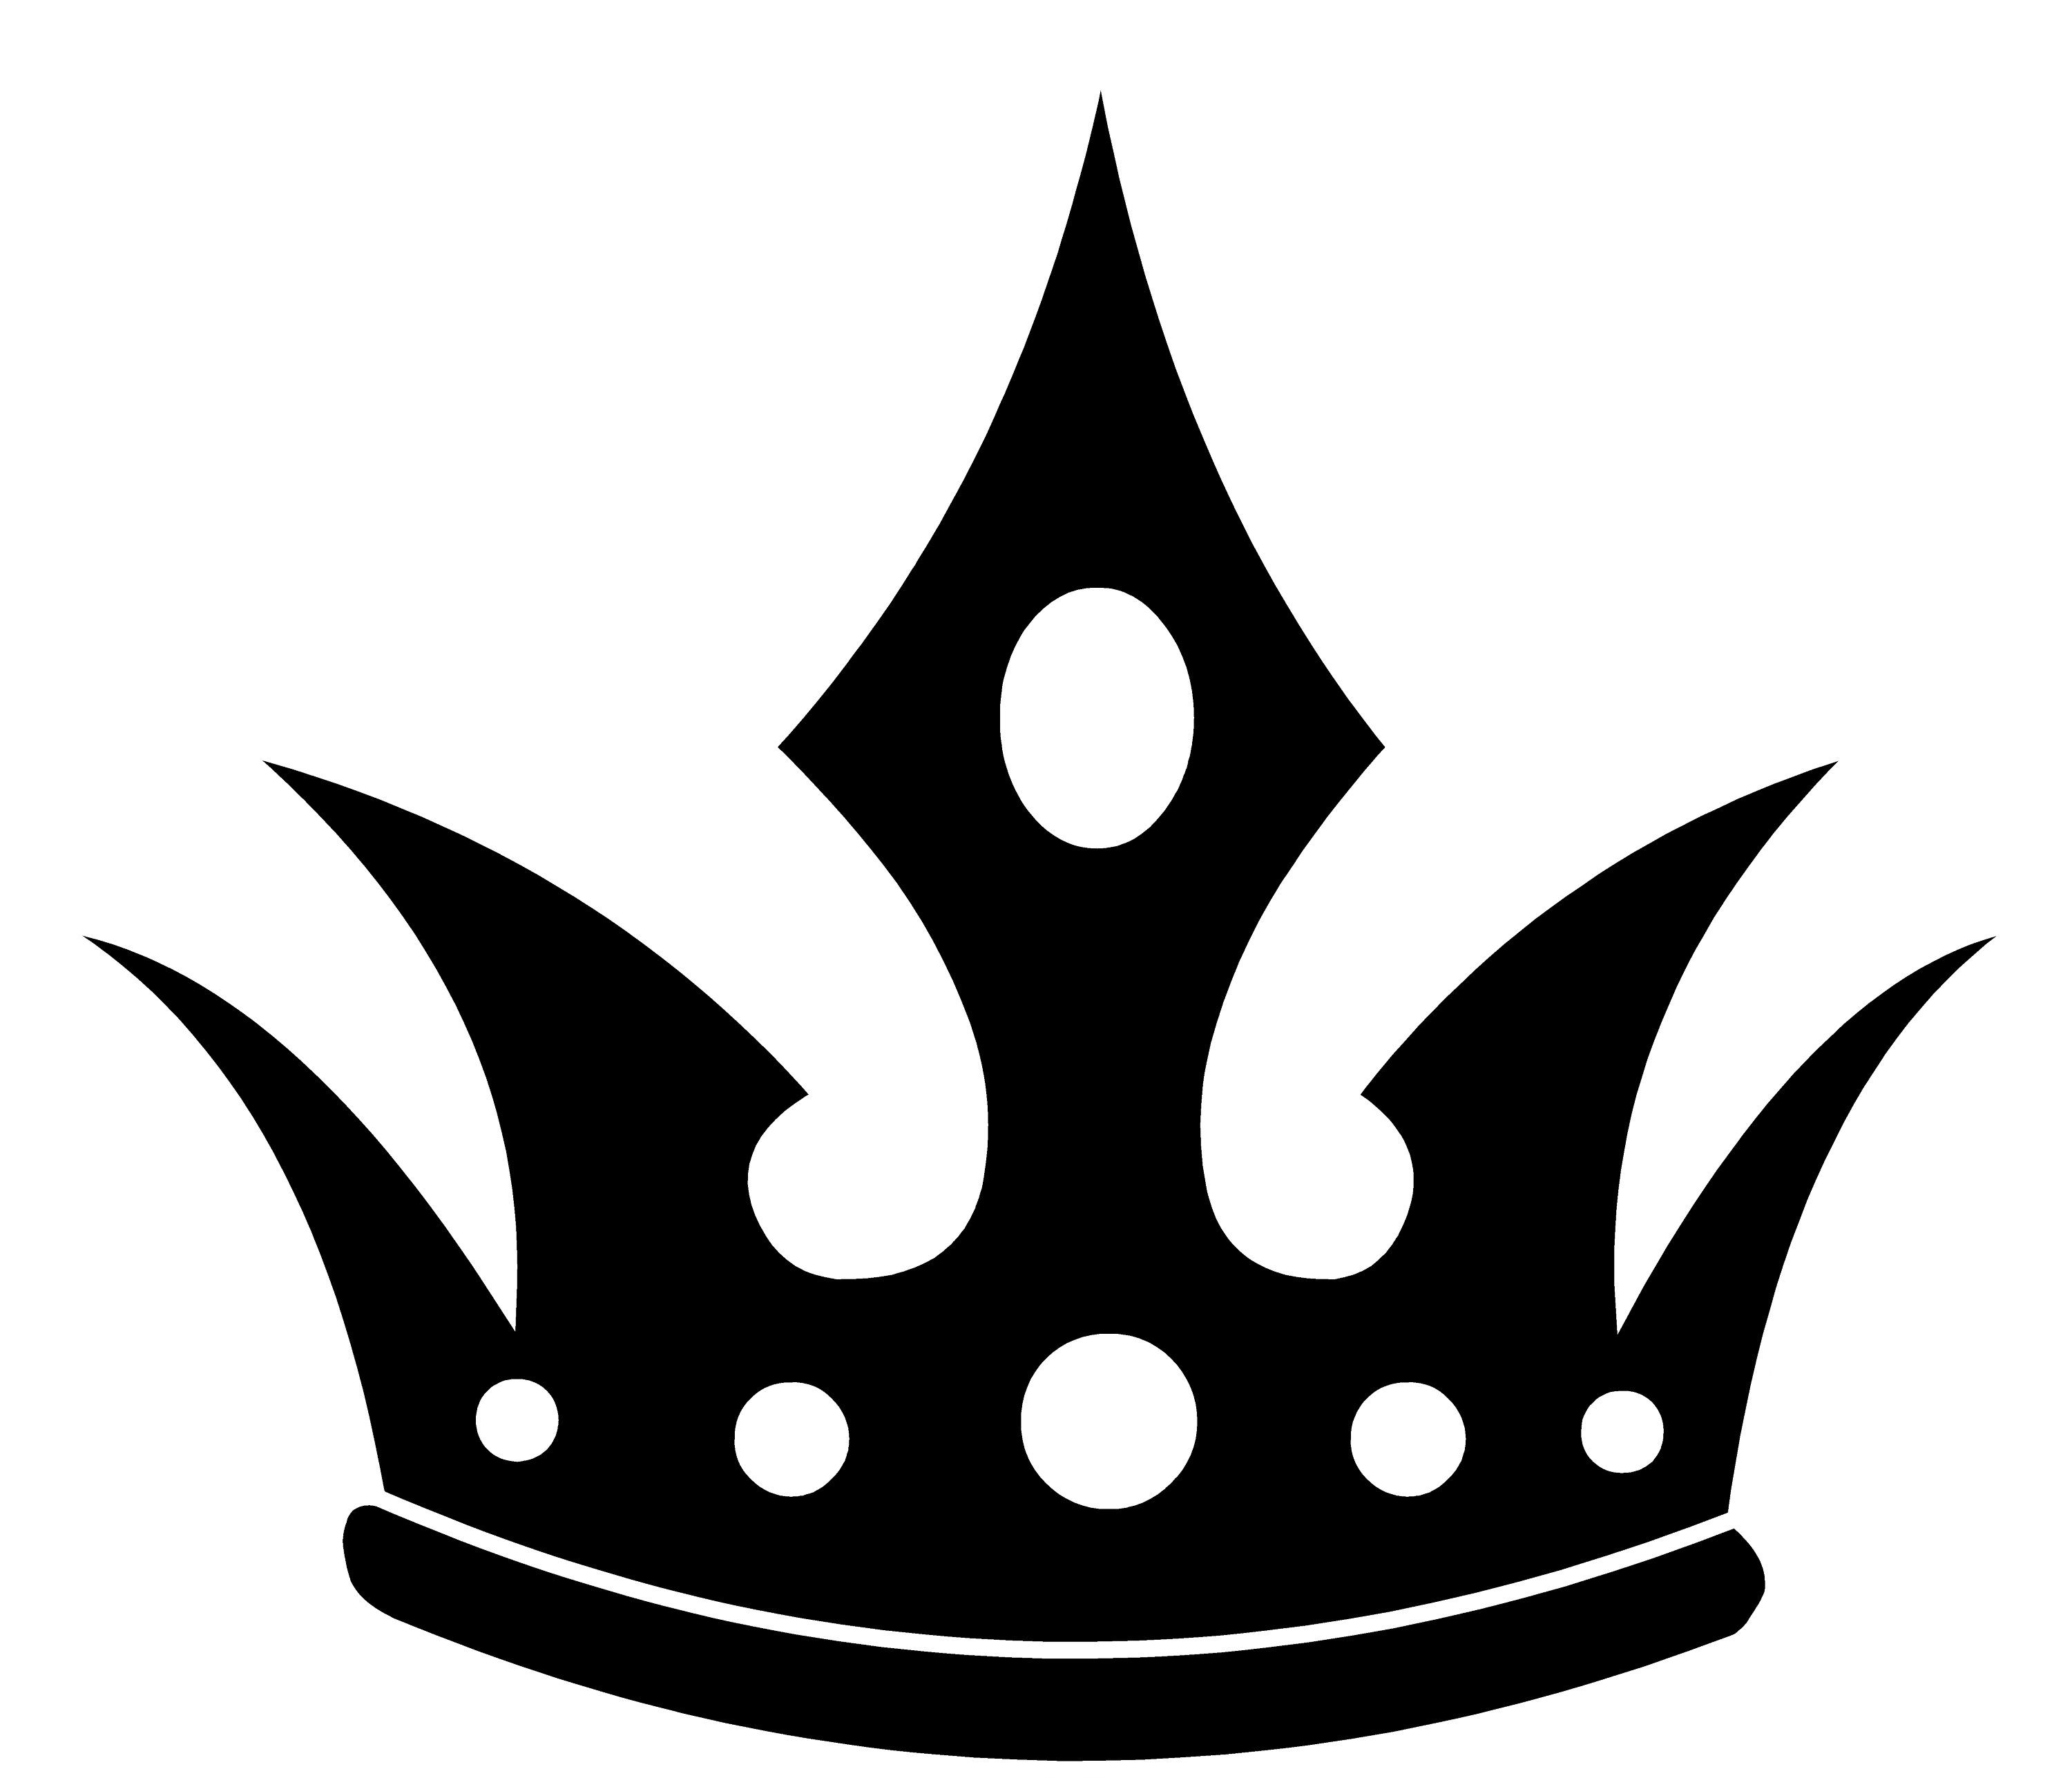 Pointed Black Crown Silhouette - Free Clip Art